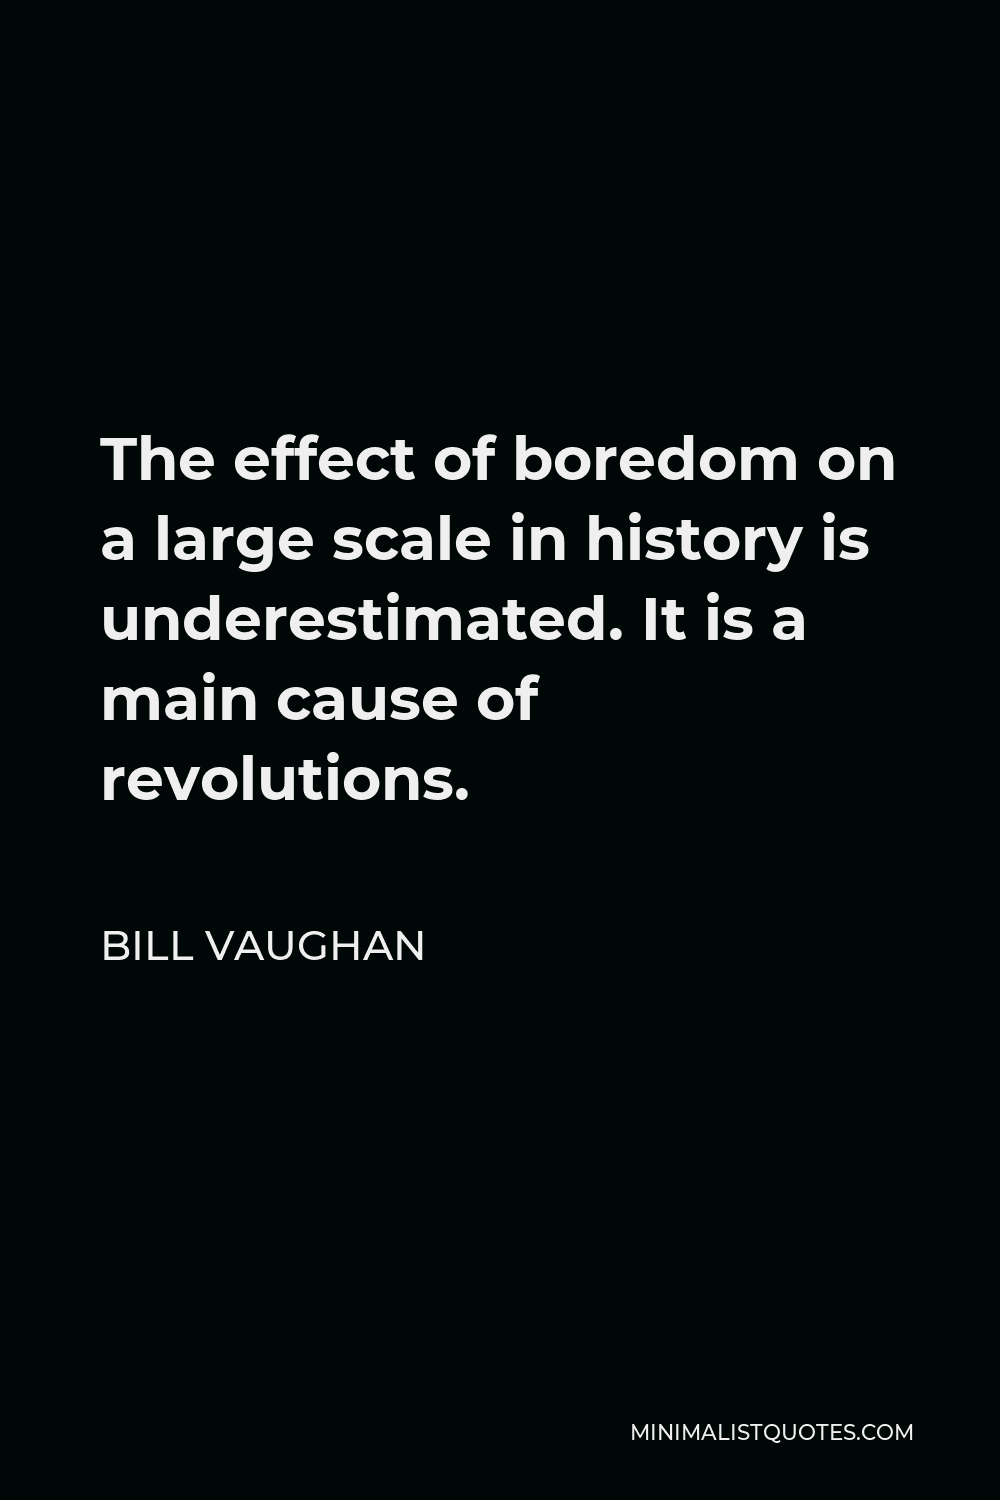 Bill Vaughan Quote - The effect of boredom on a large scale in history is underestimated. It is a main cause of revolutions.